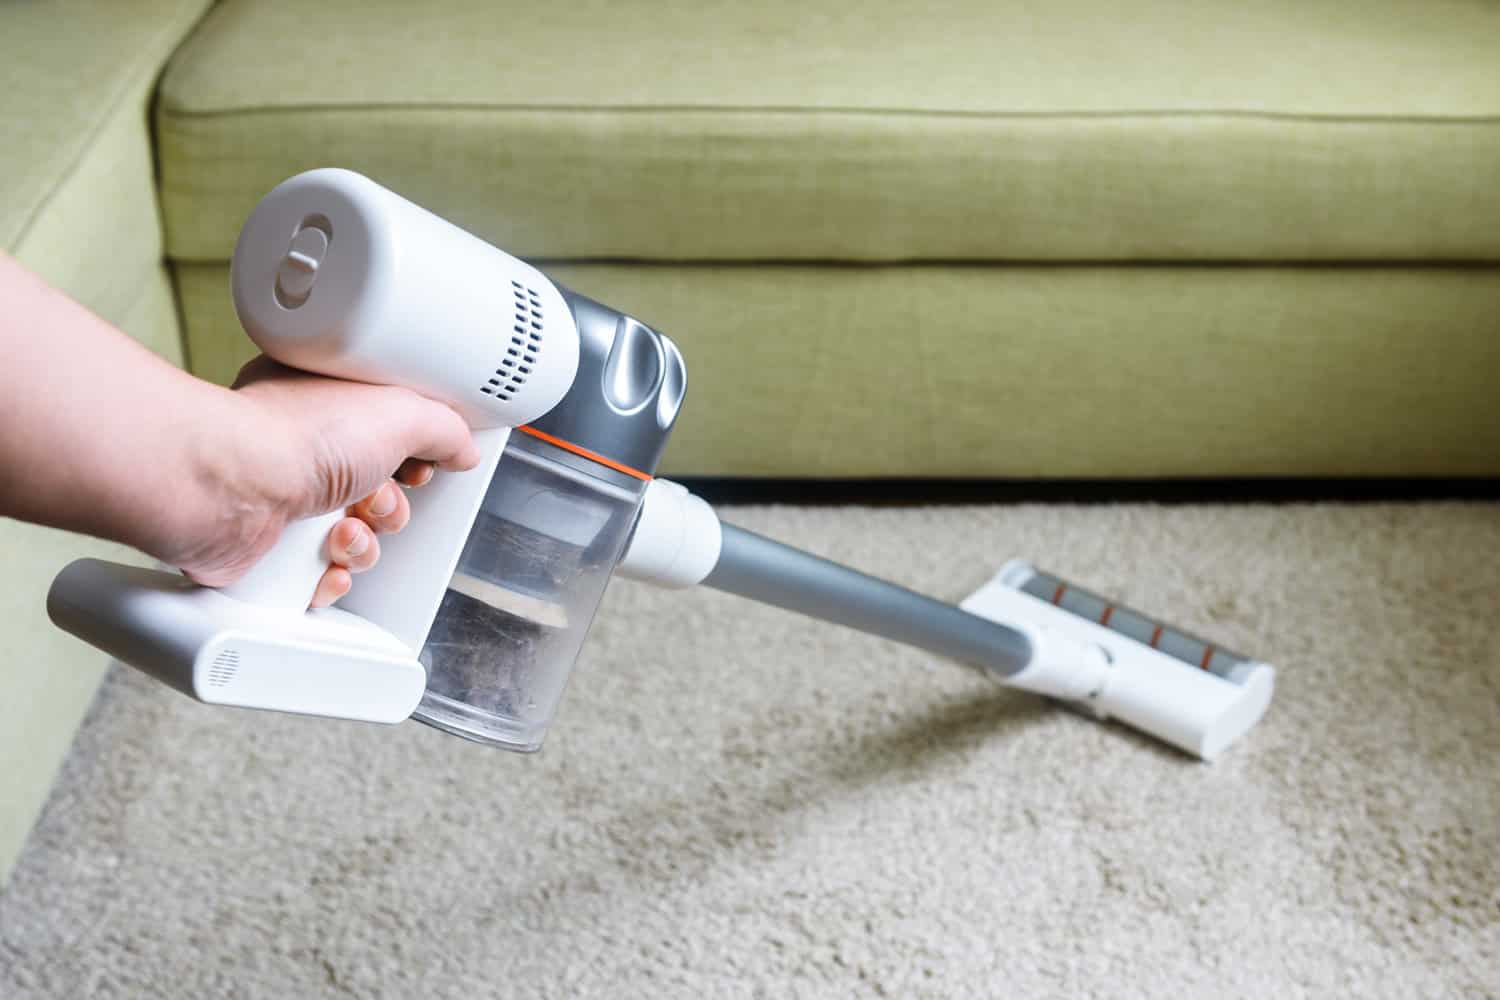 Wireless vacuum cleaner used on carpet in room. Housework with new handy upright stick hoover. Person holds vacuum cleaner, modern white broom by sofa and floor. Home cleaning and care concept.